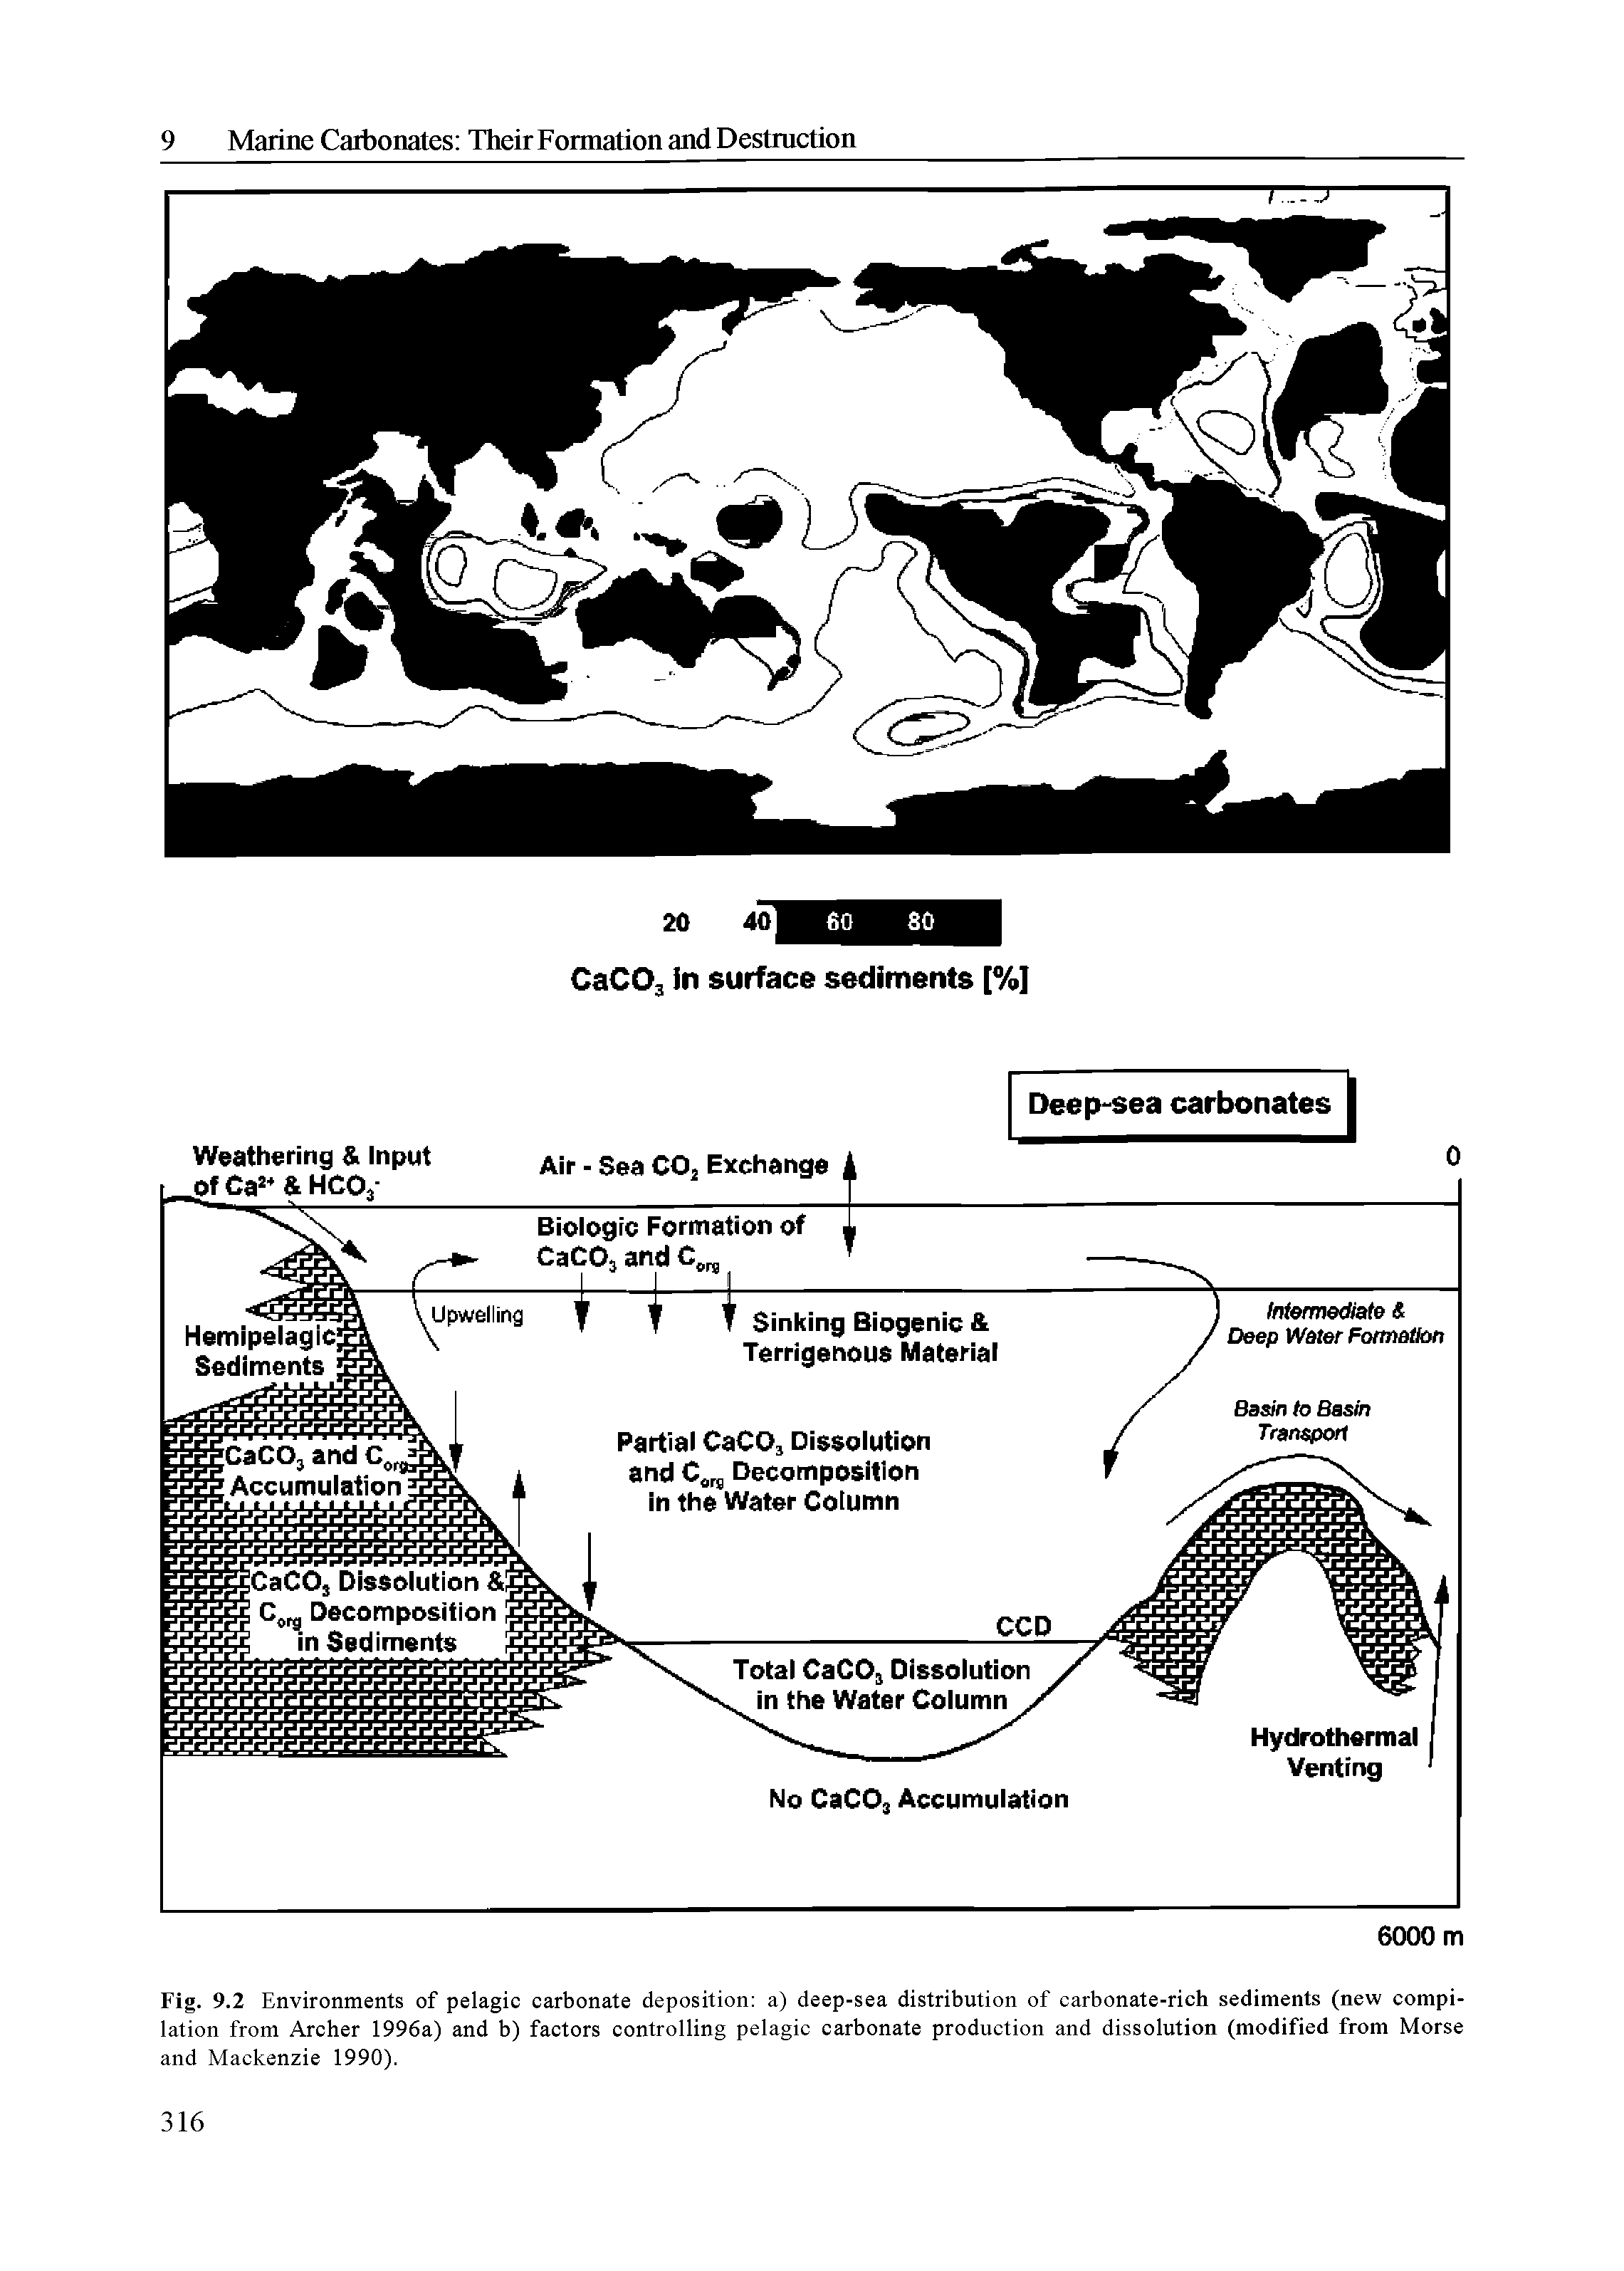 Fig. 9.2 Environments of pelagic carbonate deposition a) deep-sea distribution of carbonate-rich sediments (new compilation from Archer 1996a) and b) factors controlling pelagic carbonate production and dissolution (modified from Morse and Mackenzie 1990).